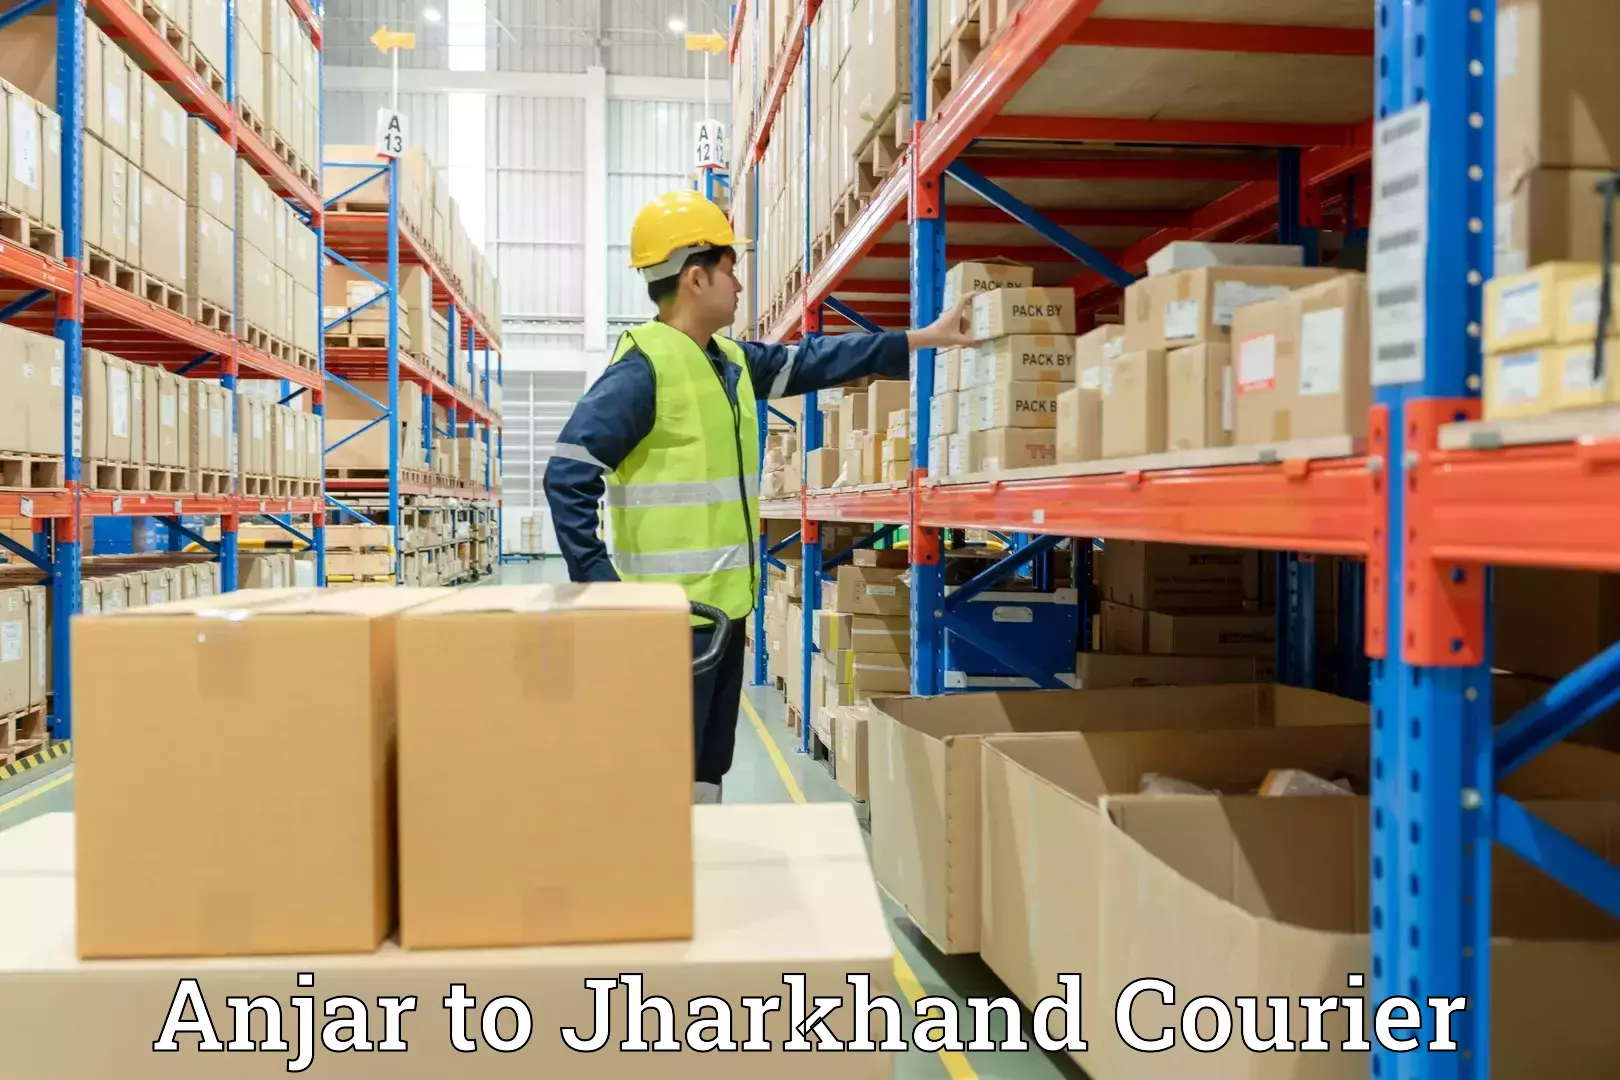 Household logistics services Anjar to Jharkhand